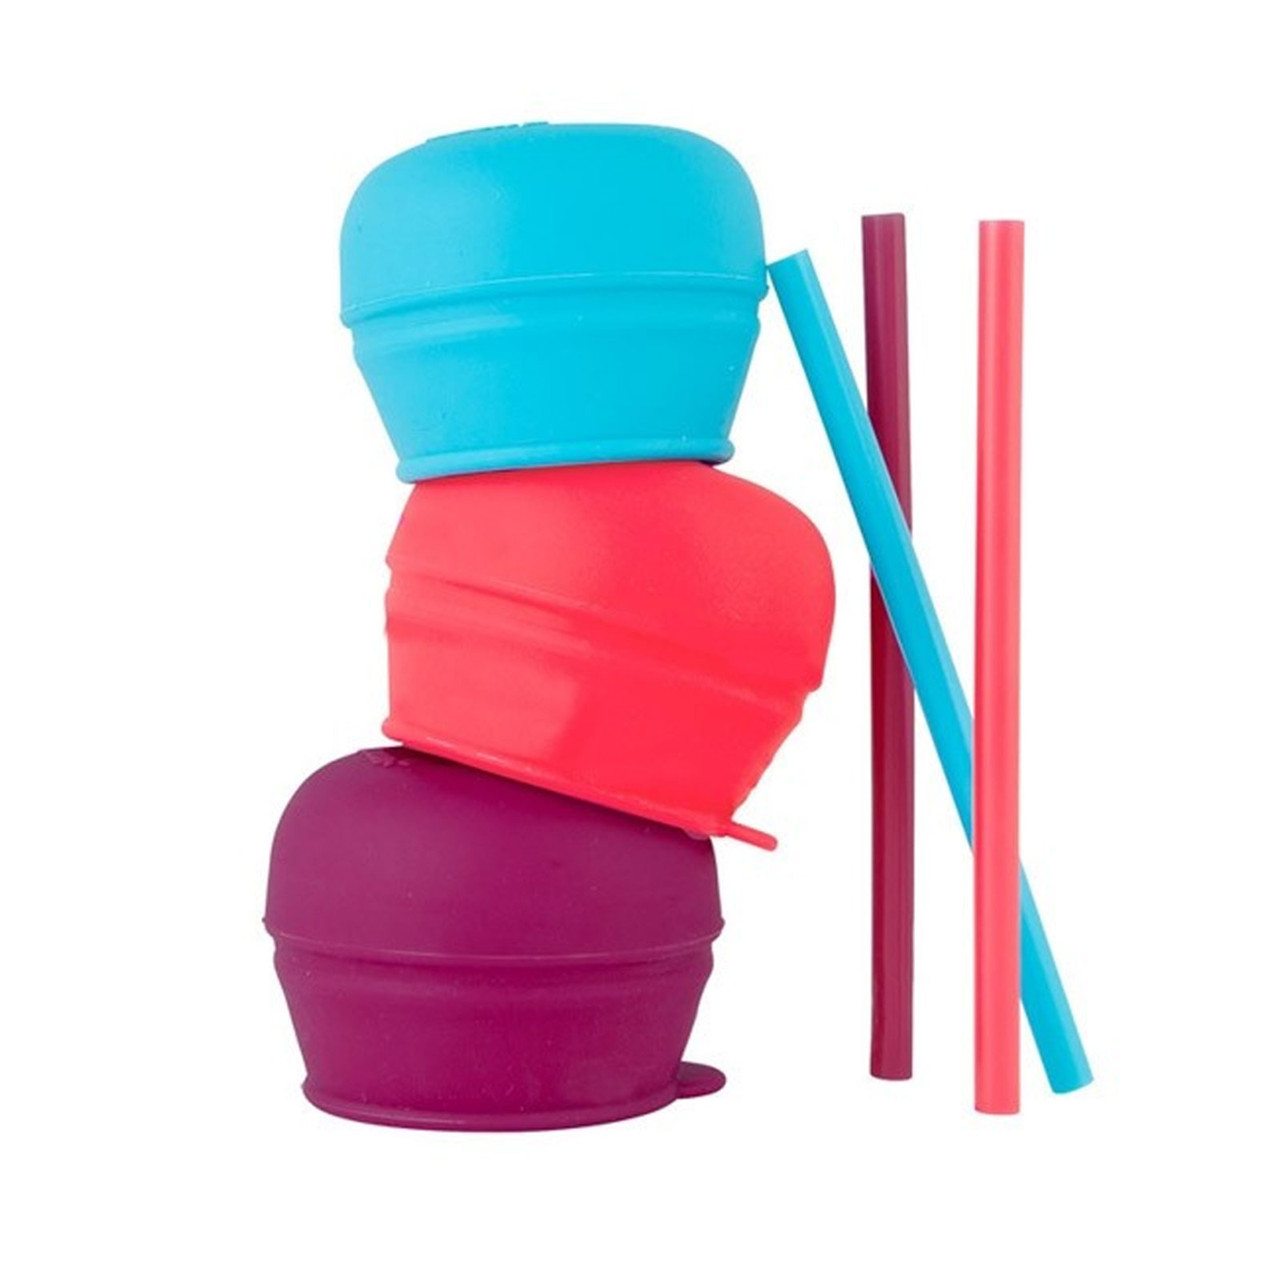 Snug　Straw　Buy　Boon　Online　Drinking　Pink　Reusable　Toddler　Lids　Straws